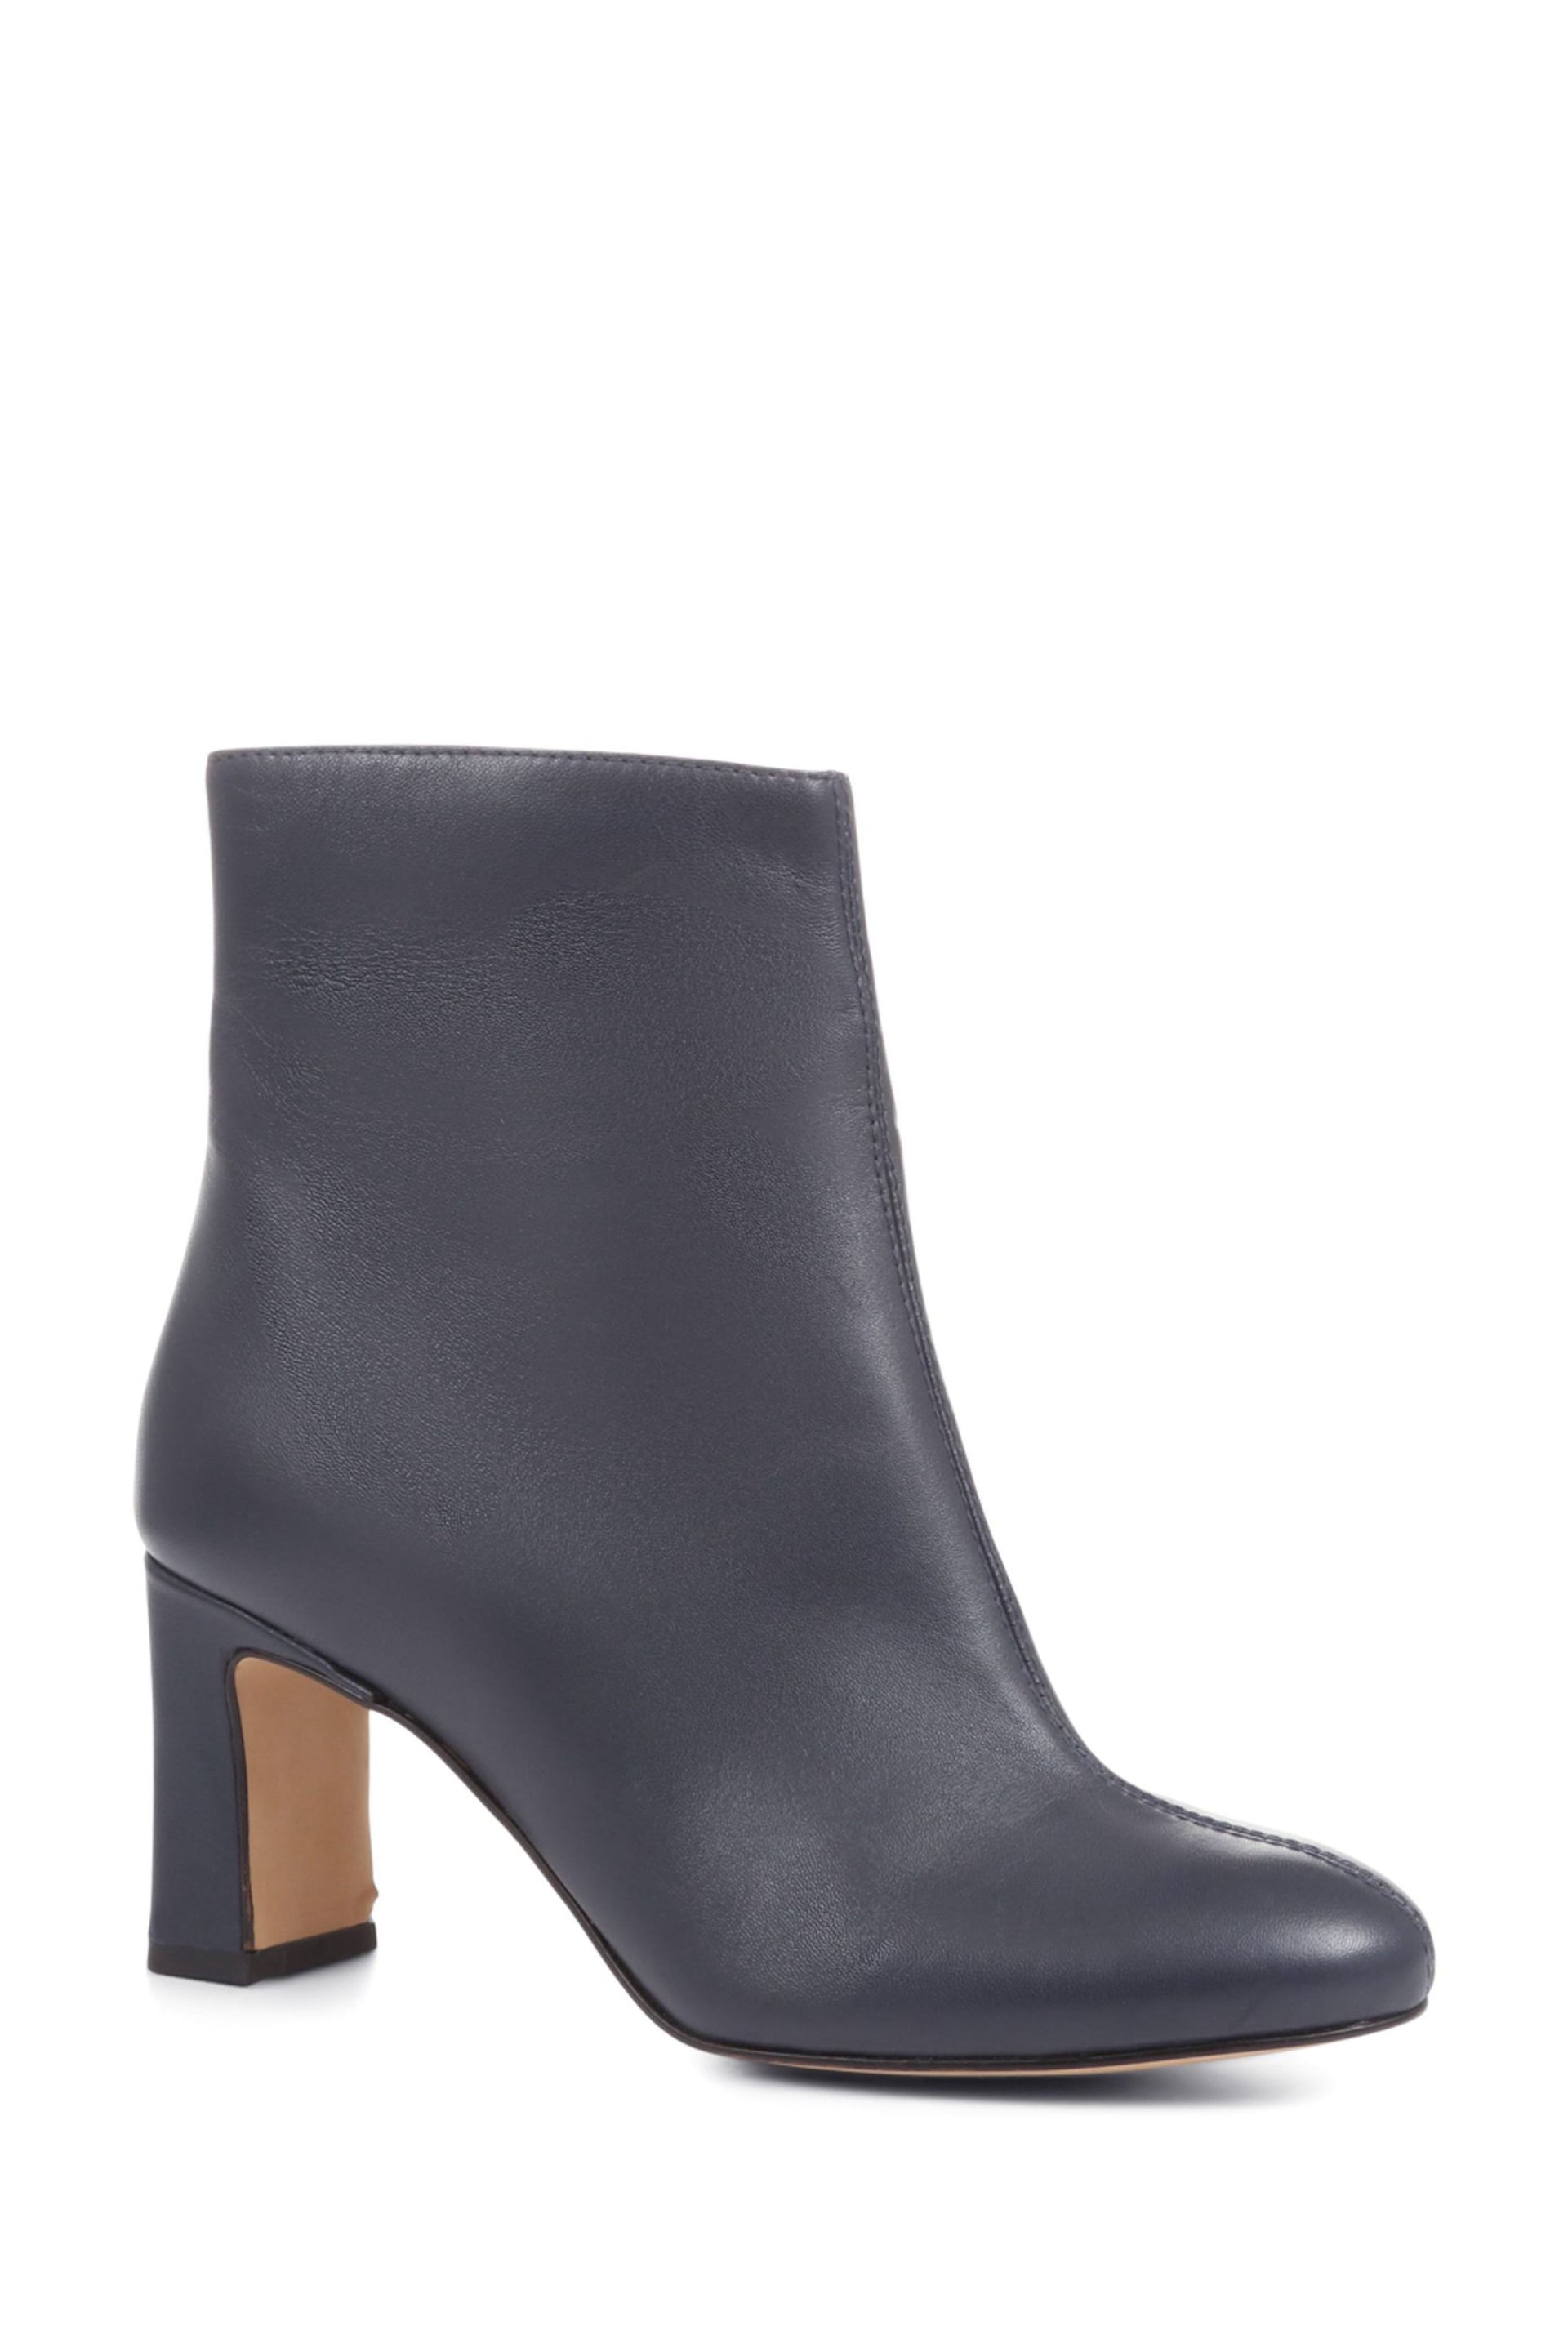 Jones Bootmaker Letty Heeled Leather Ankle Boots - Image 3 of 6